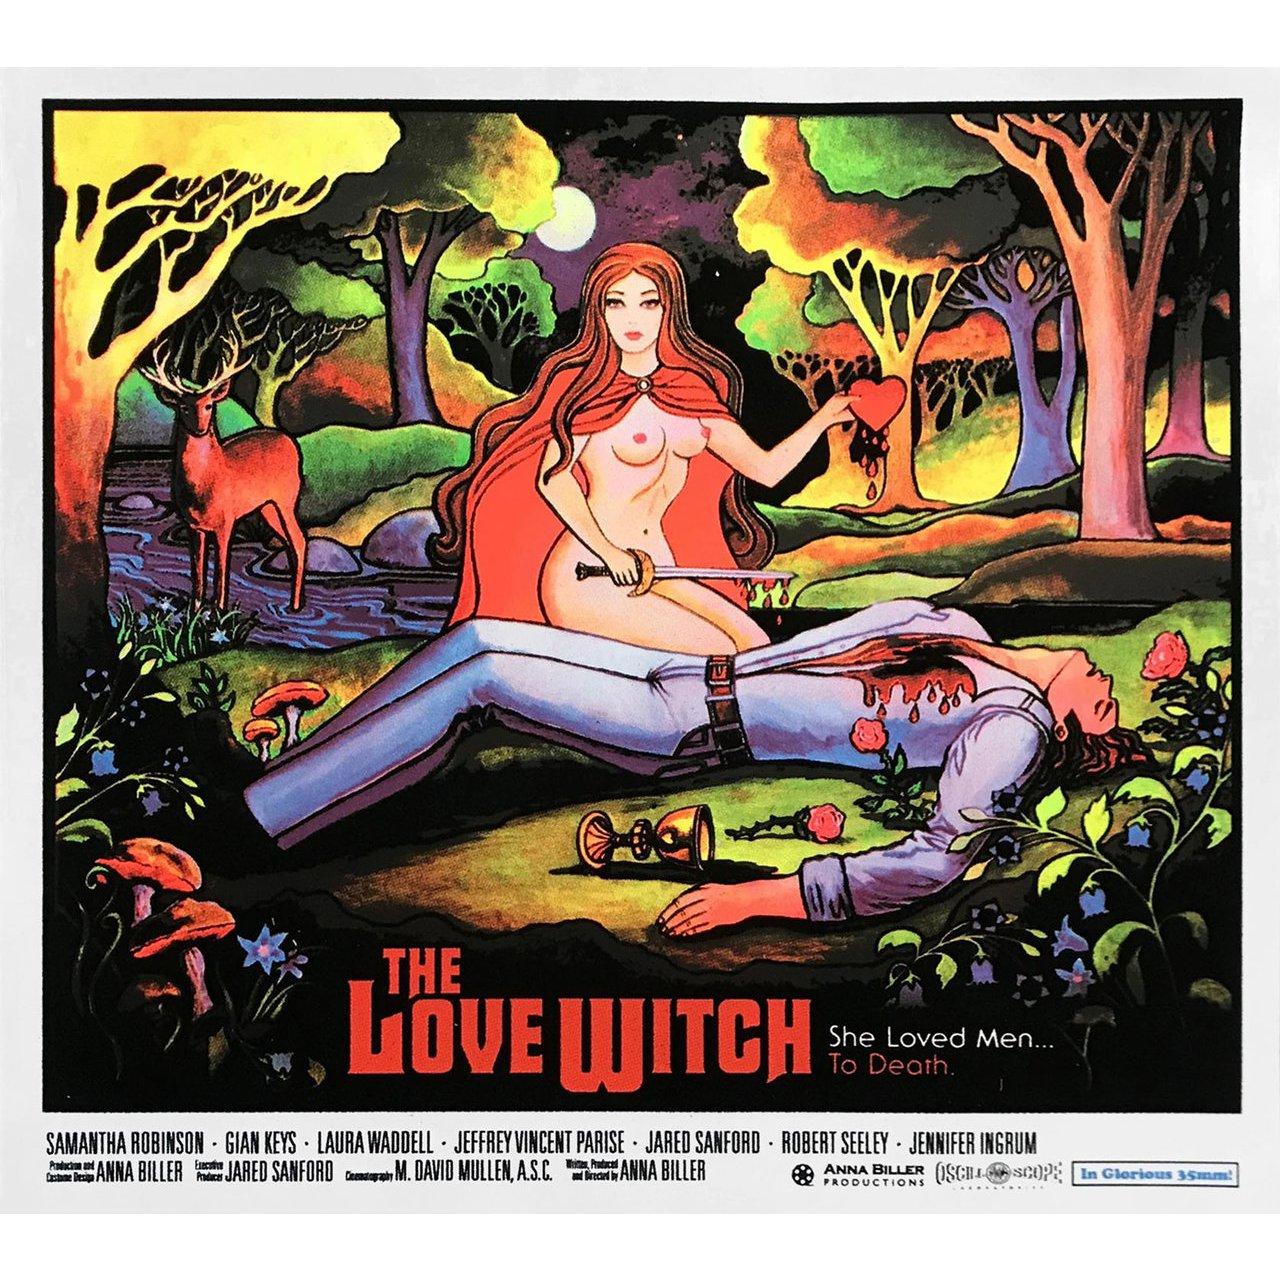 Original 2016 U.S. half sheet poster by Anna Biller for the film The Love Witch directed by Anna Biller with Samantha Robinson / Gian Keys / Laura Waddell / Jeffrey Vincent Parise. Very Good-Fine condition, rolled. Please note: the size is stated in